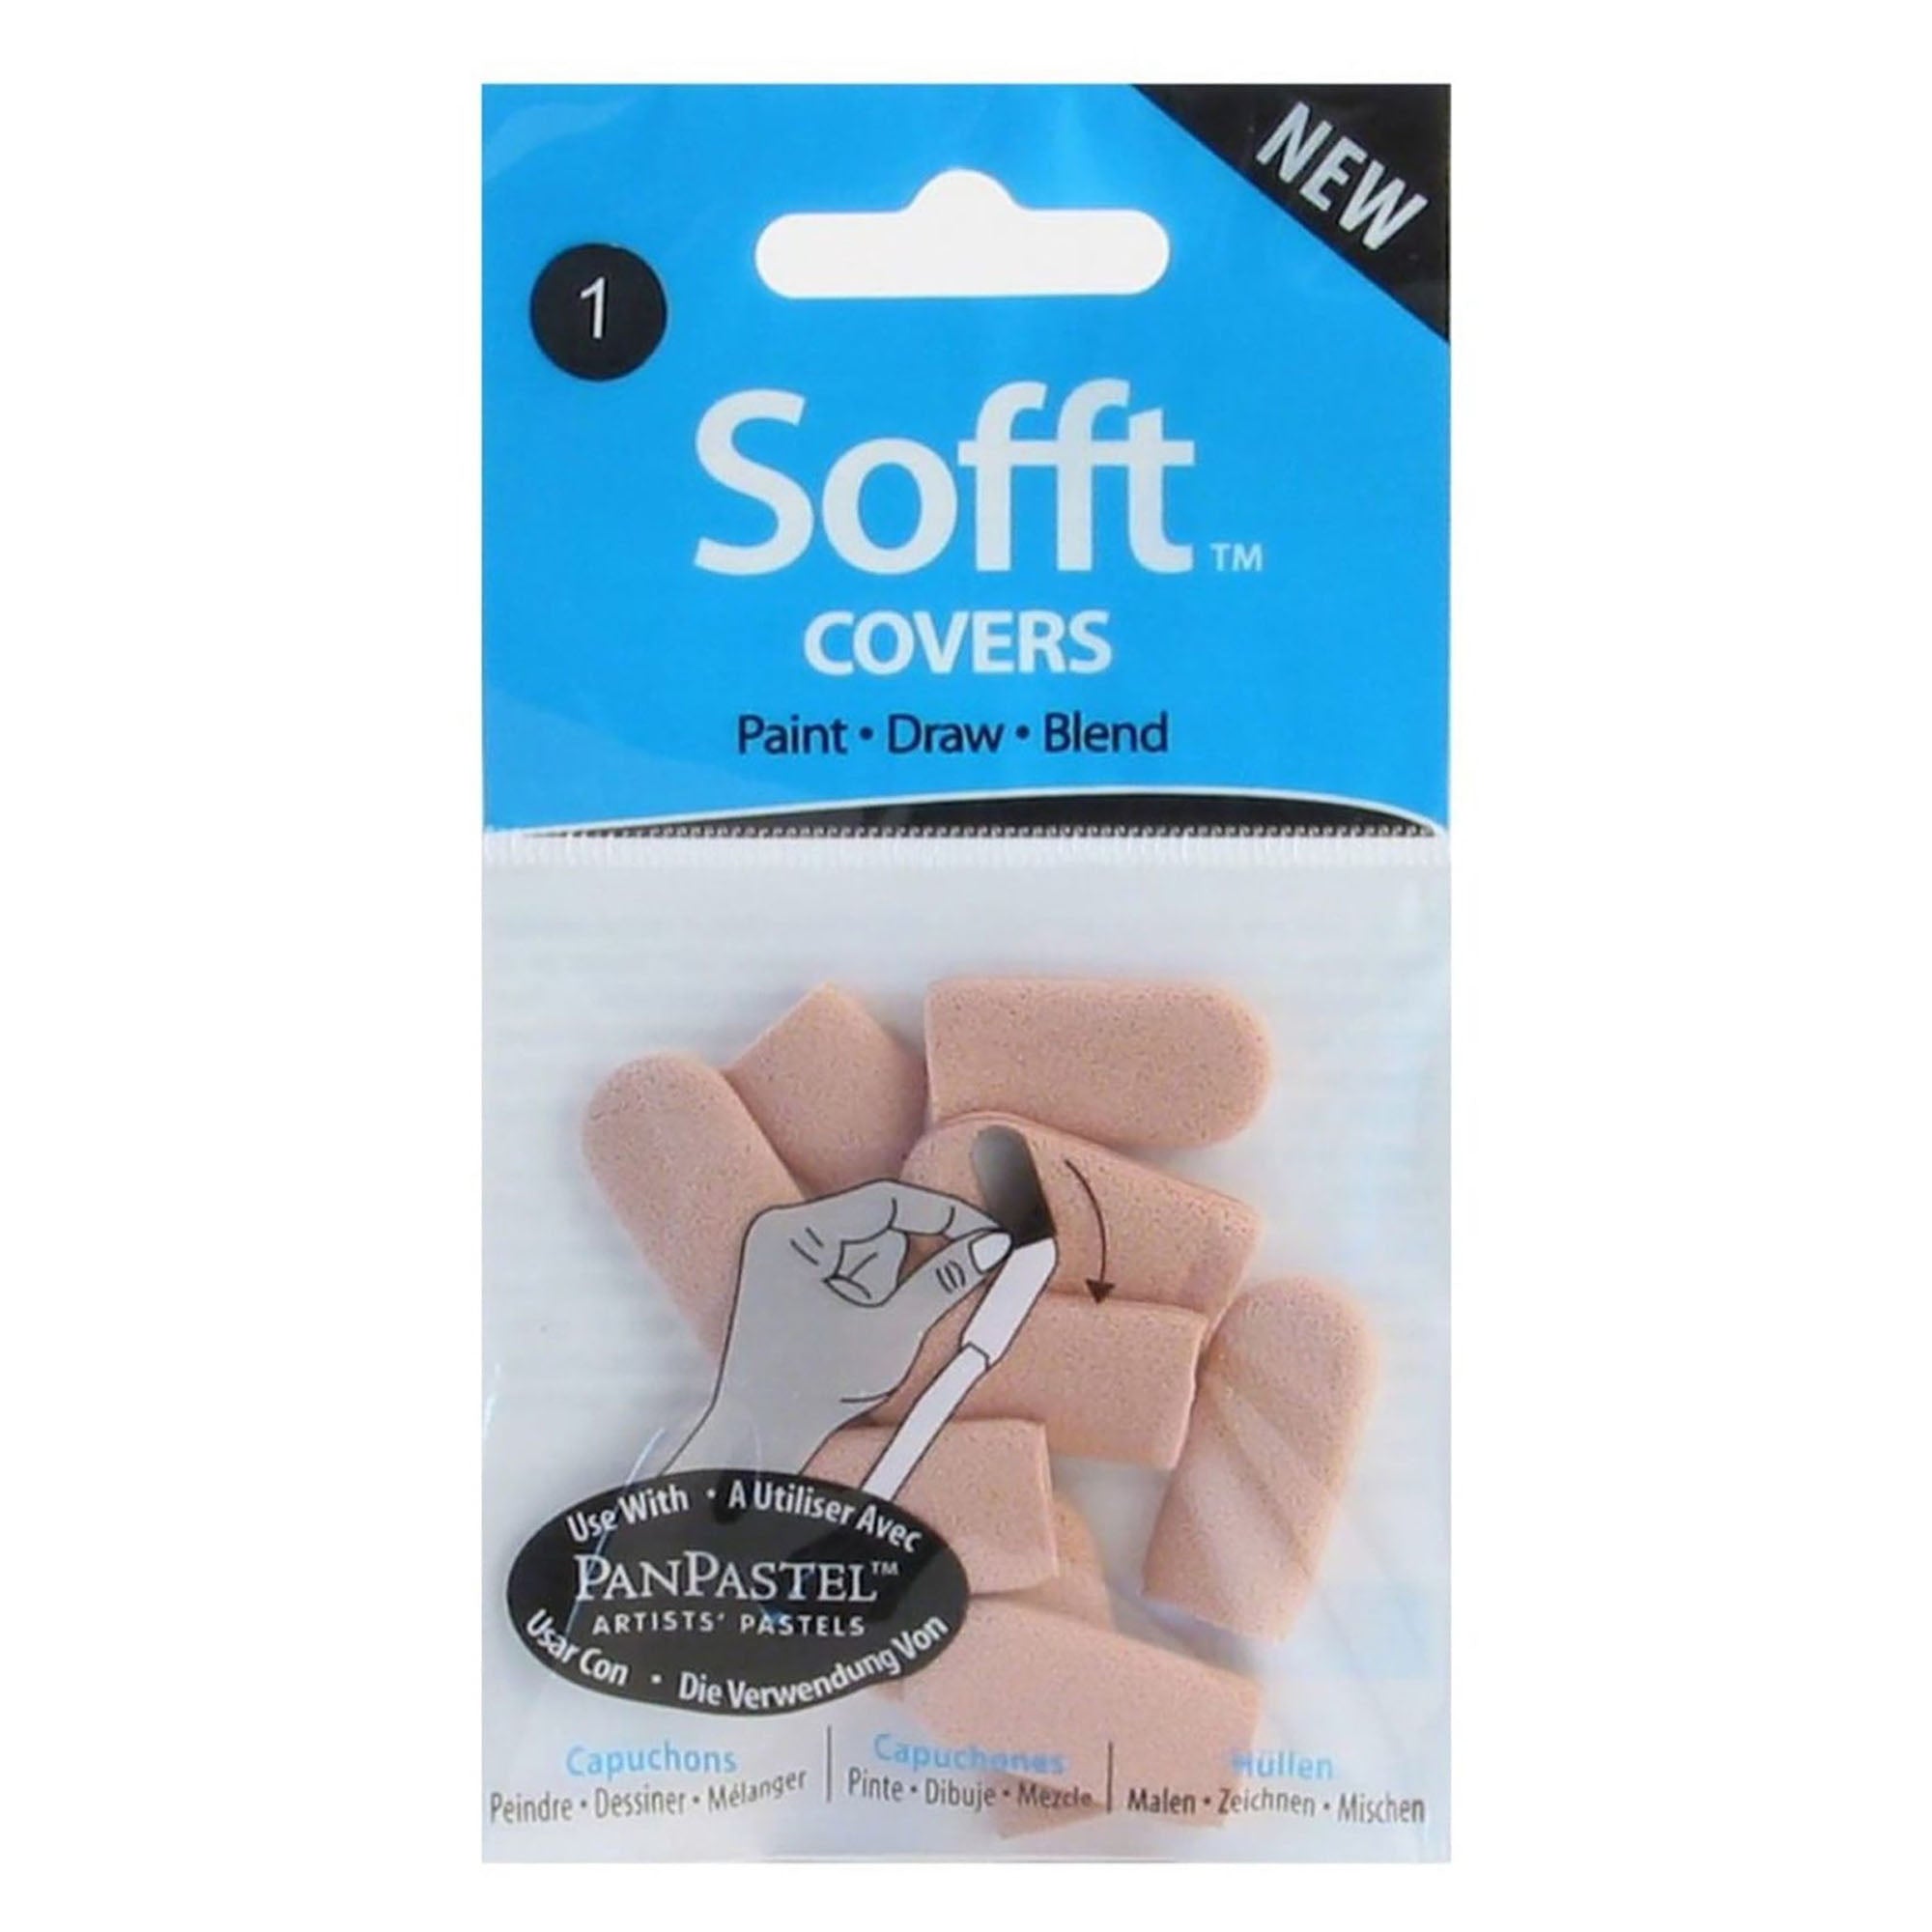 PanPastel Soft Tools No 1 Knife Covers - Round (Pack of 10)